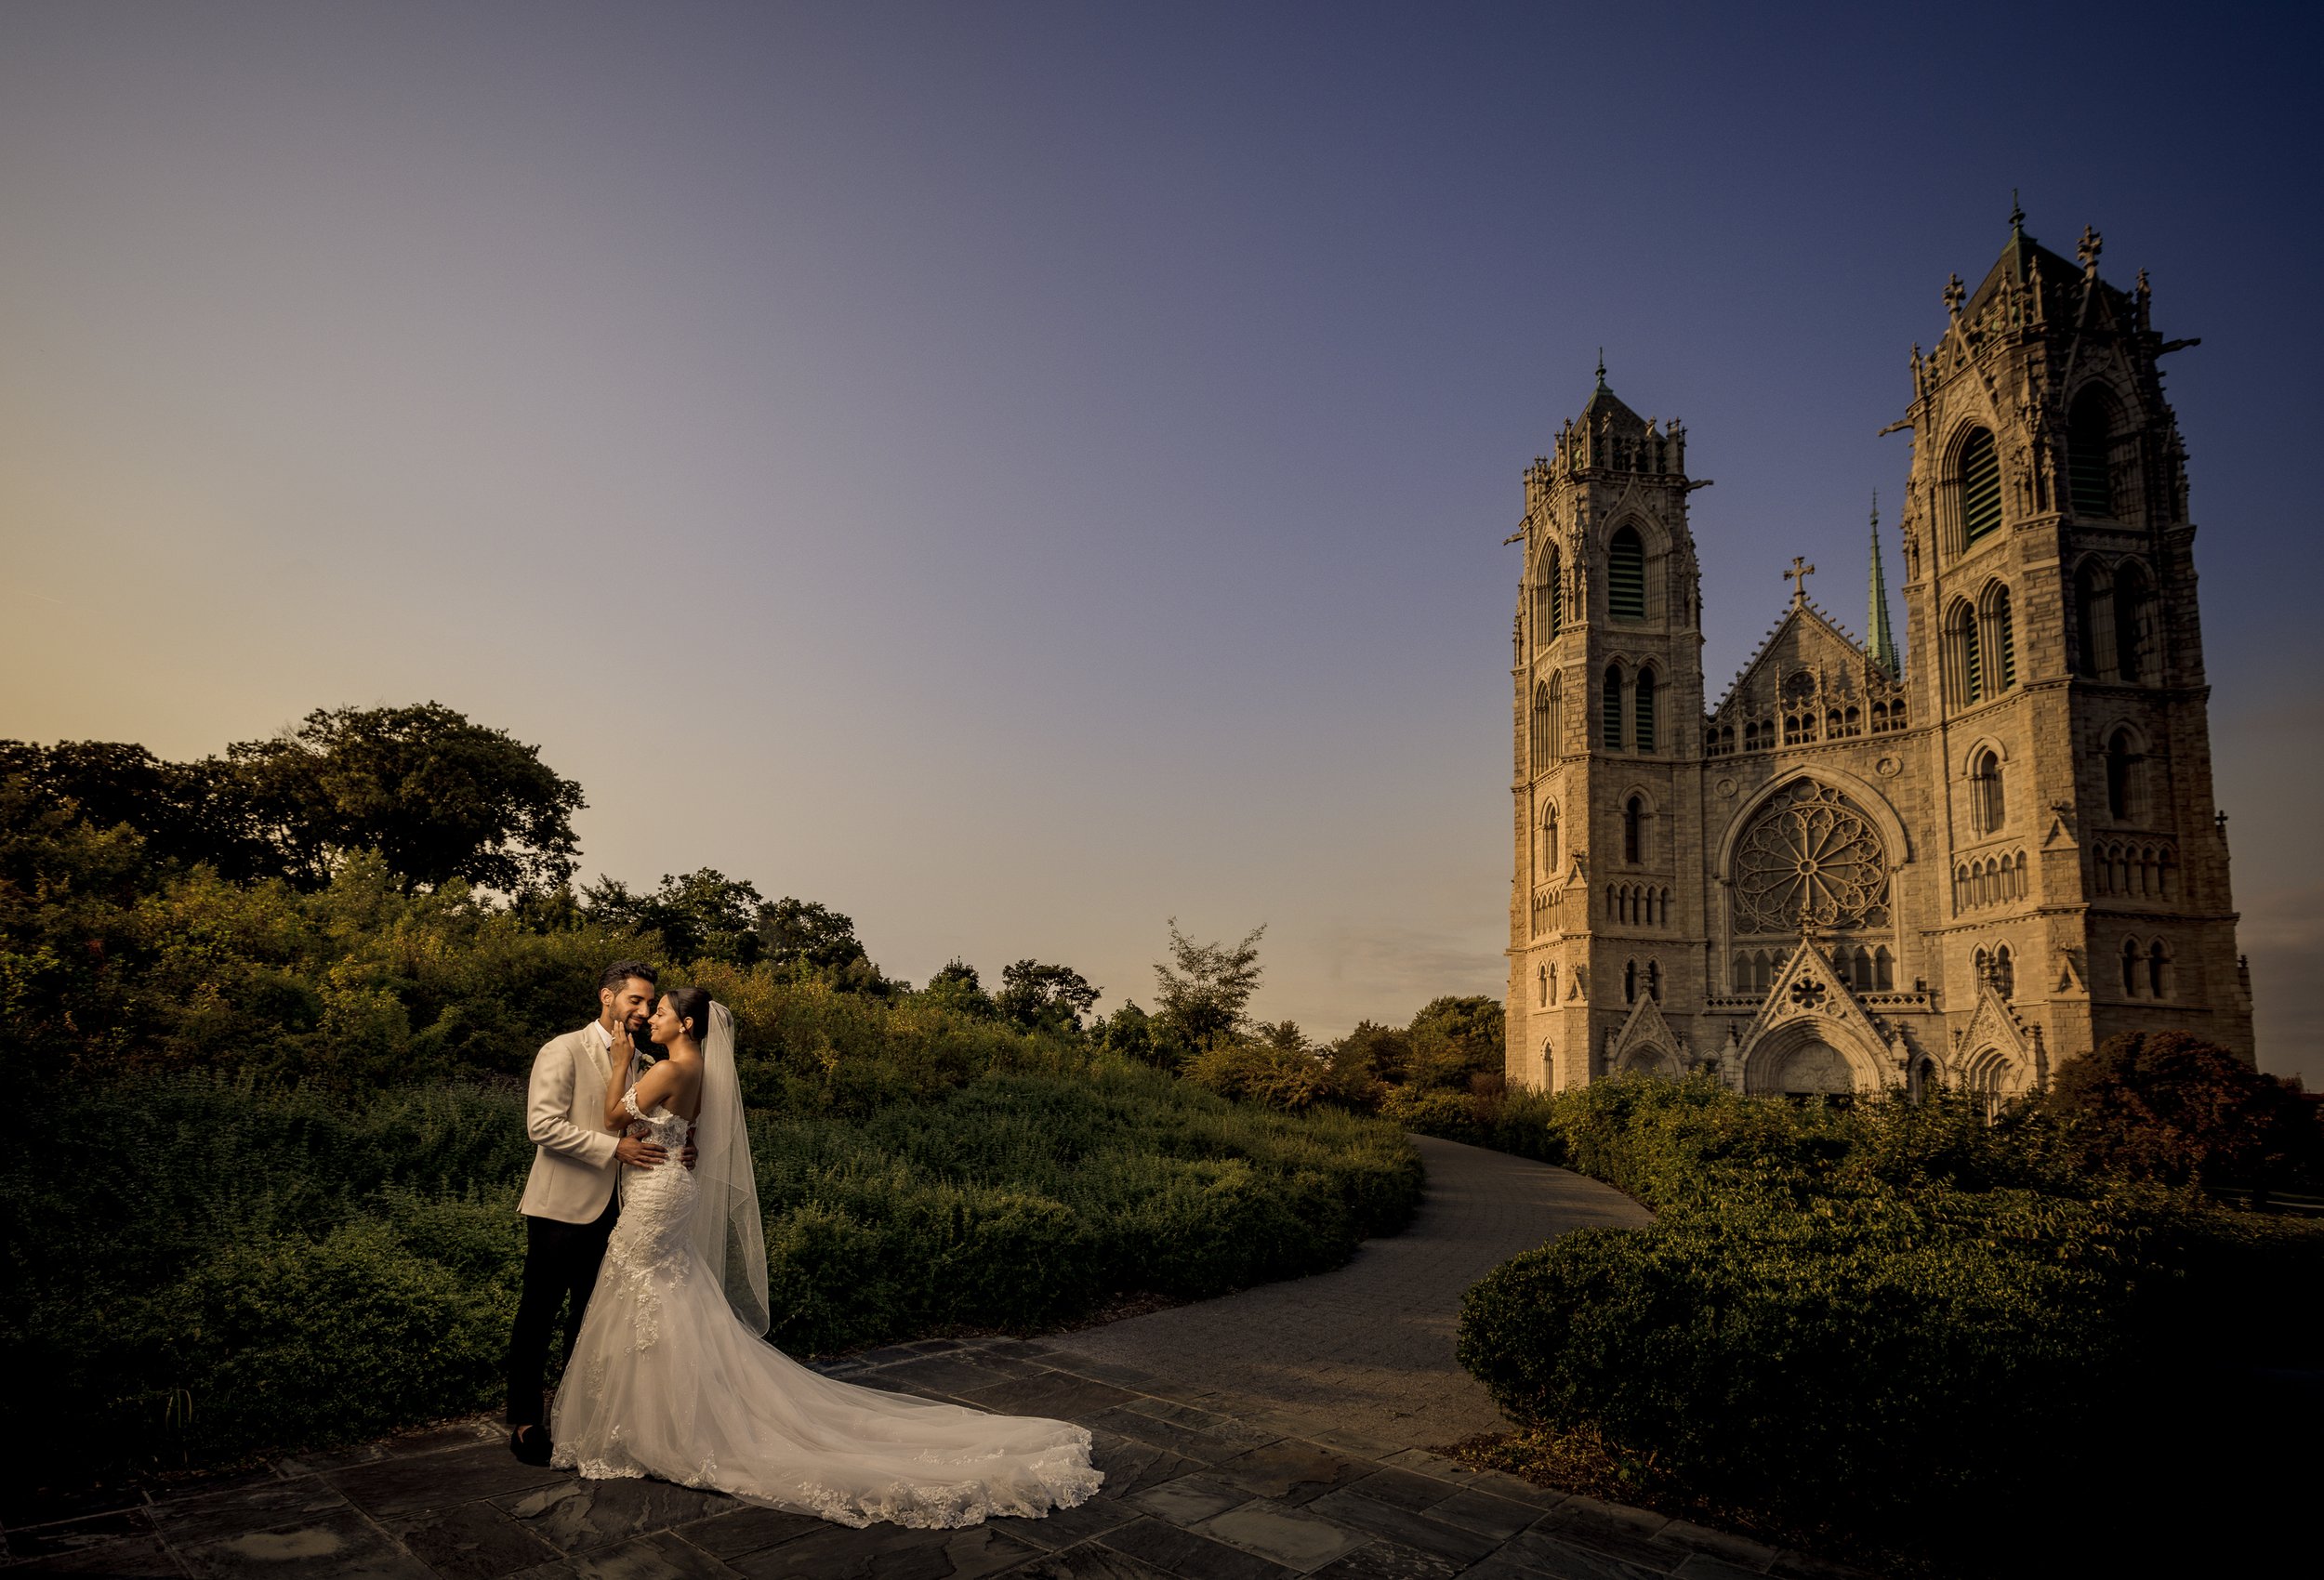 Cathedral_Basilica_of_the_Sacred Heart_wedding.JPG